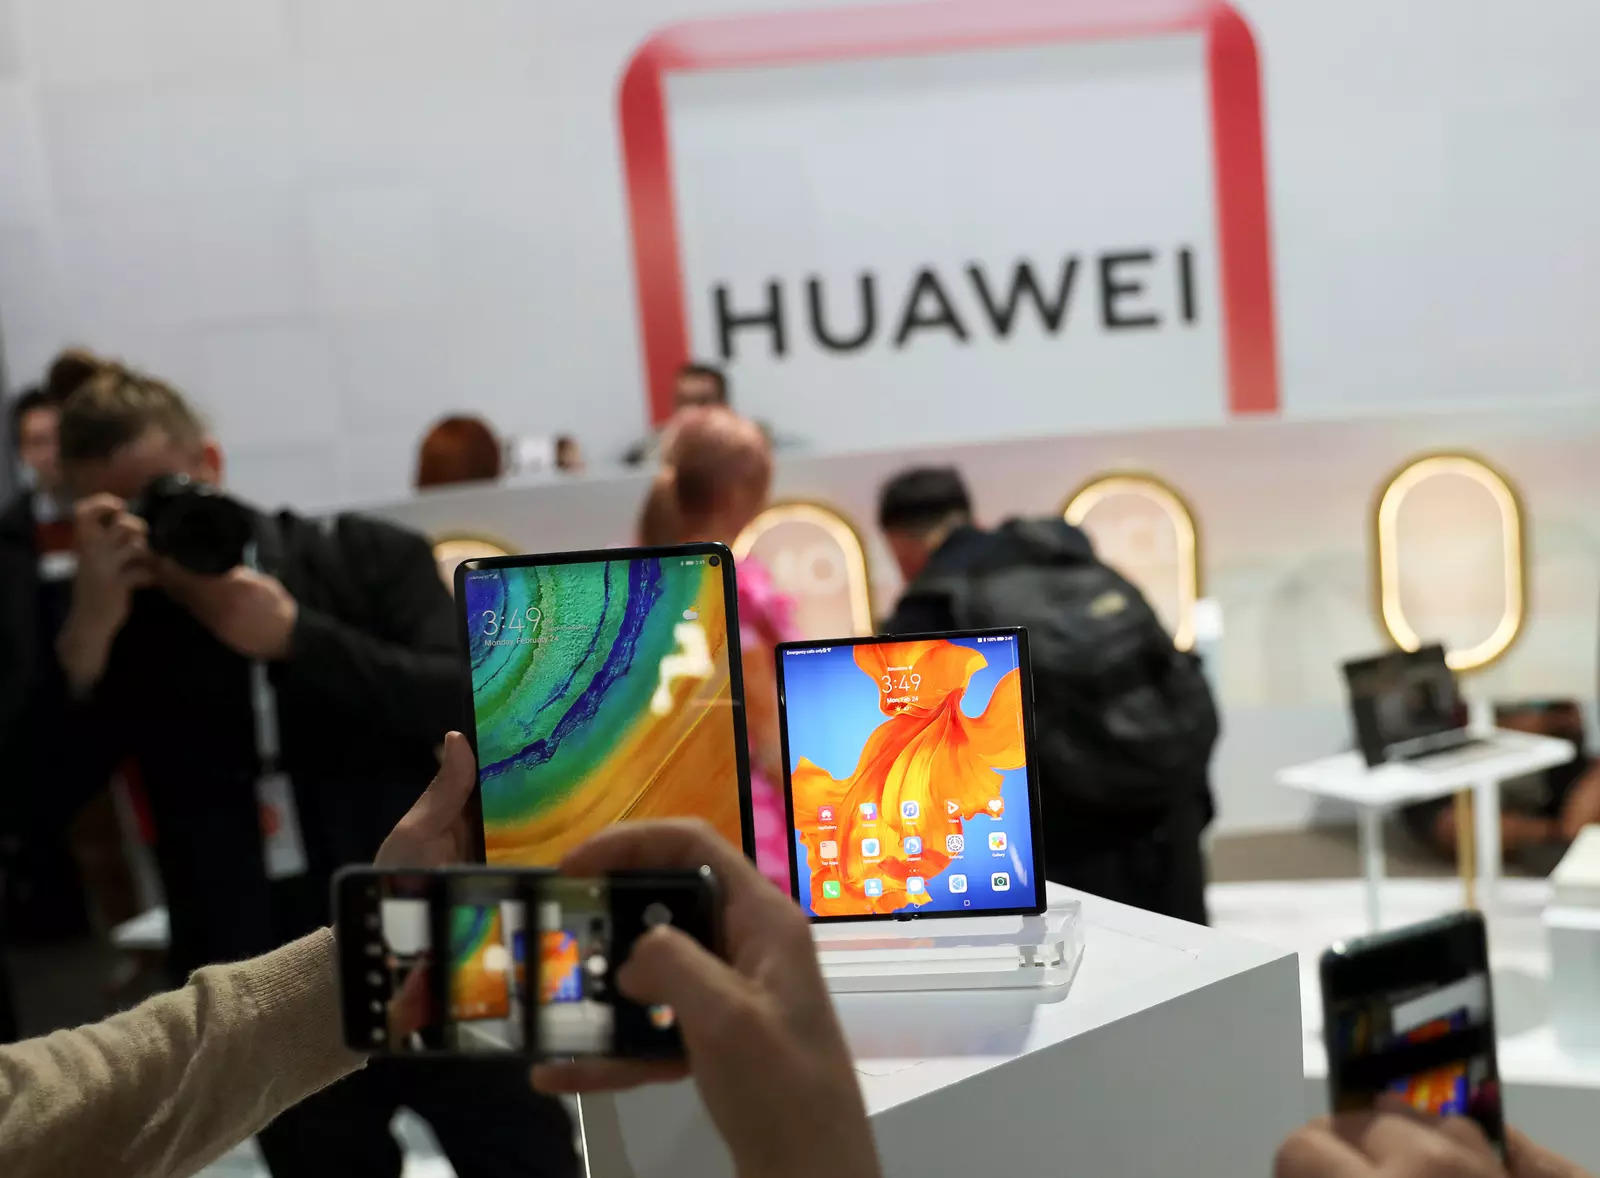 huawei: Huawei was reportedly working on a game console, laptop – Latest News